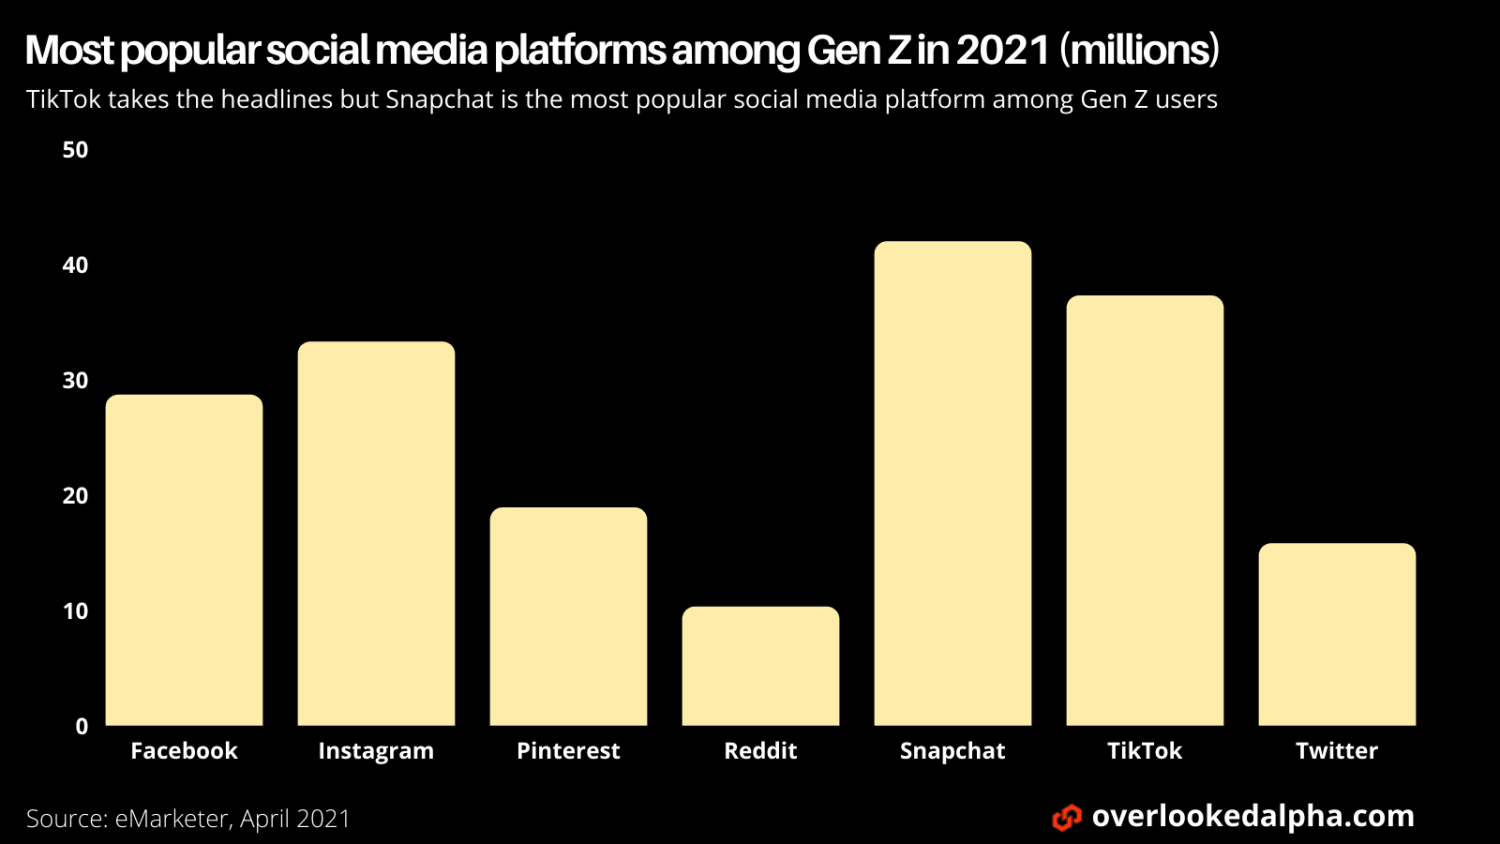 TikTok makes the headlines but Snapchat is the most popular social media platform among highly coveted Gen Z users.